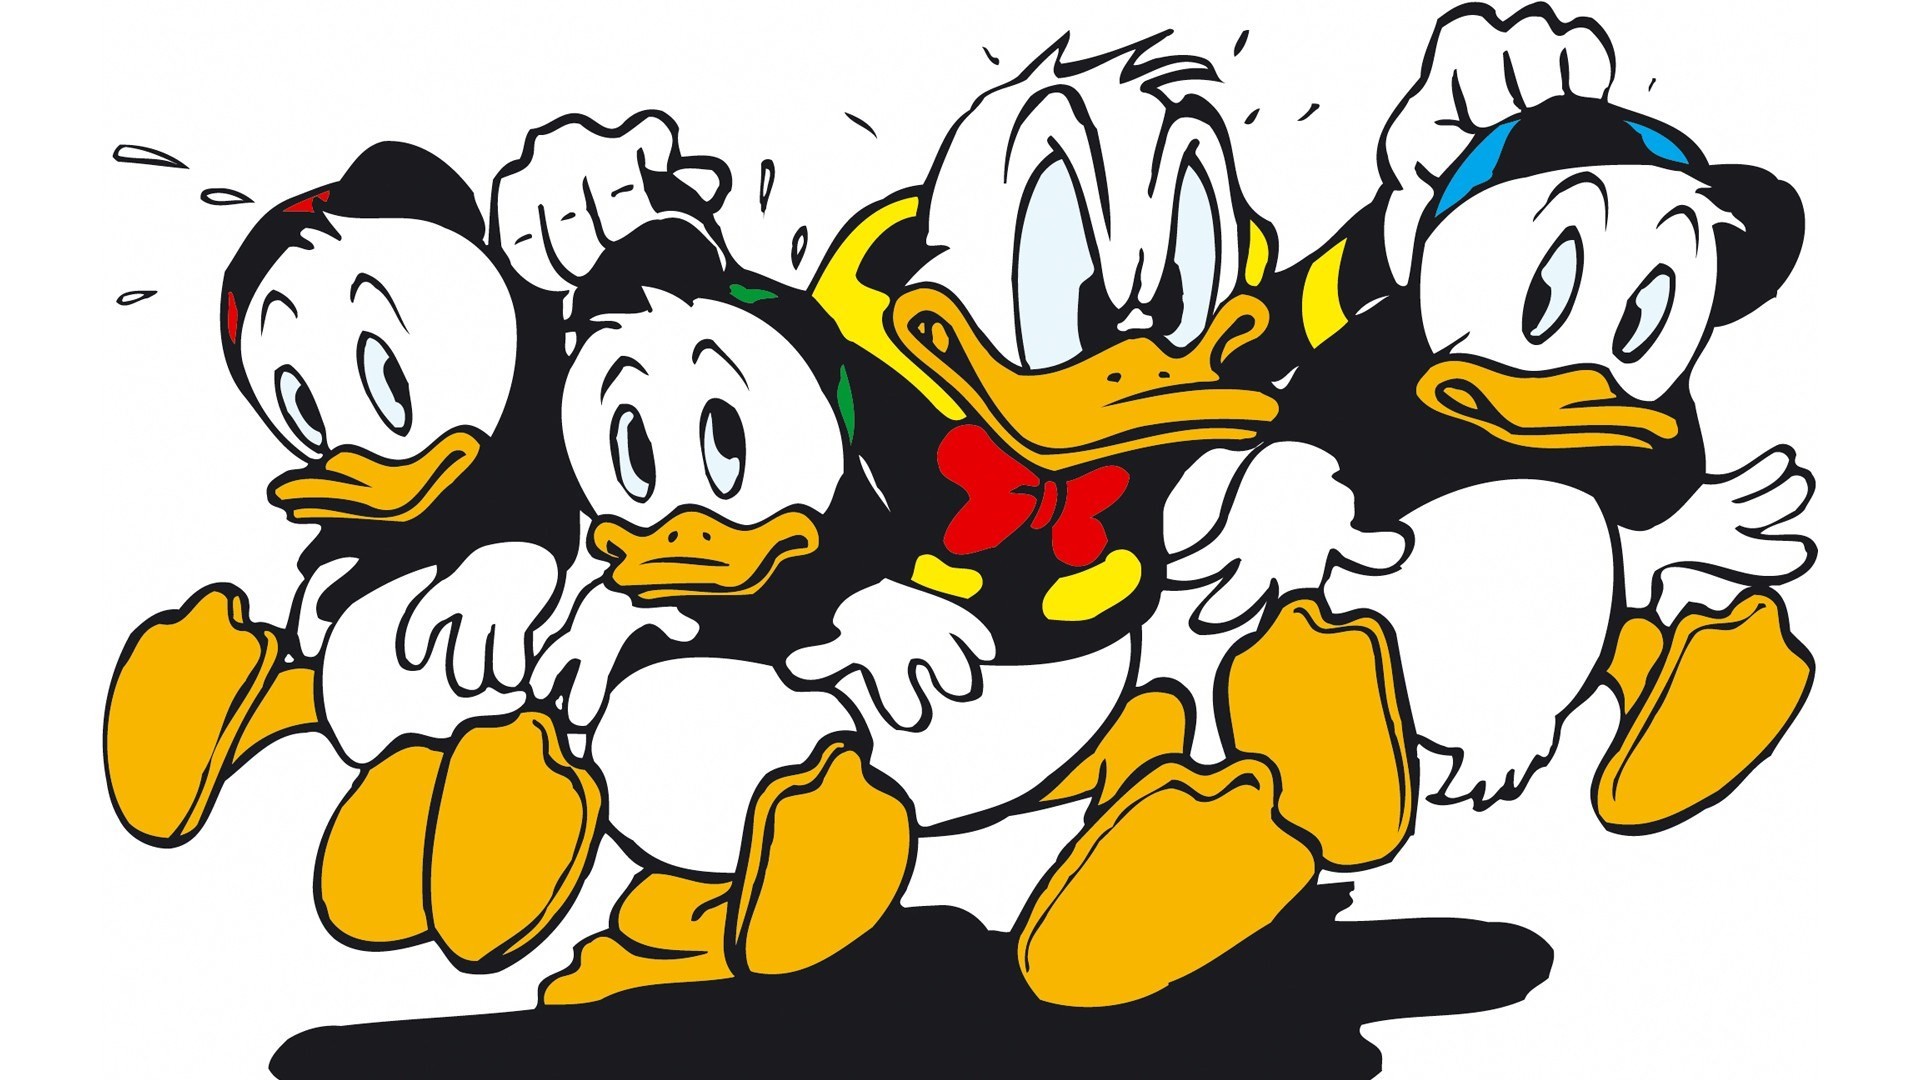 1920x1080 Cool donald duck image,  (287 kB)